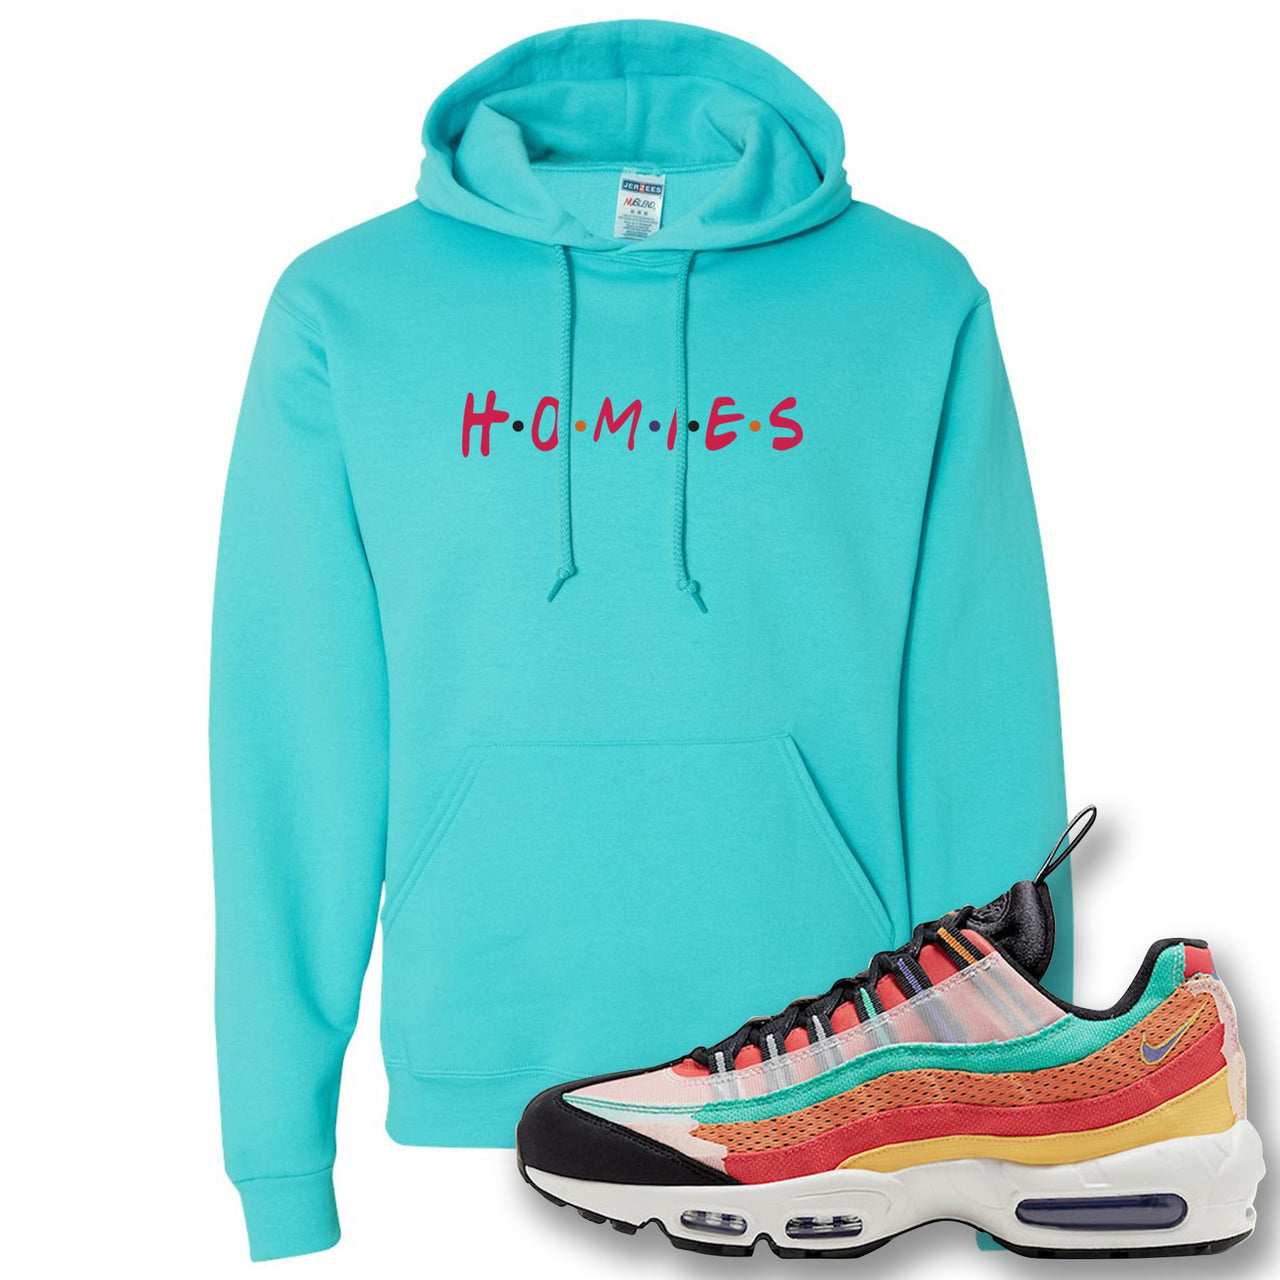 Air Max 95 Black History Month Sneaker Scuba Blue Pullover Hoodie | Hoodie to match Nike Air Max 95 Black History Month Shoes | Homies